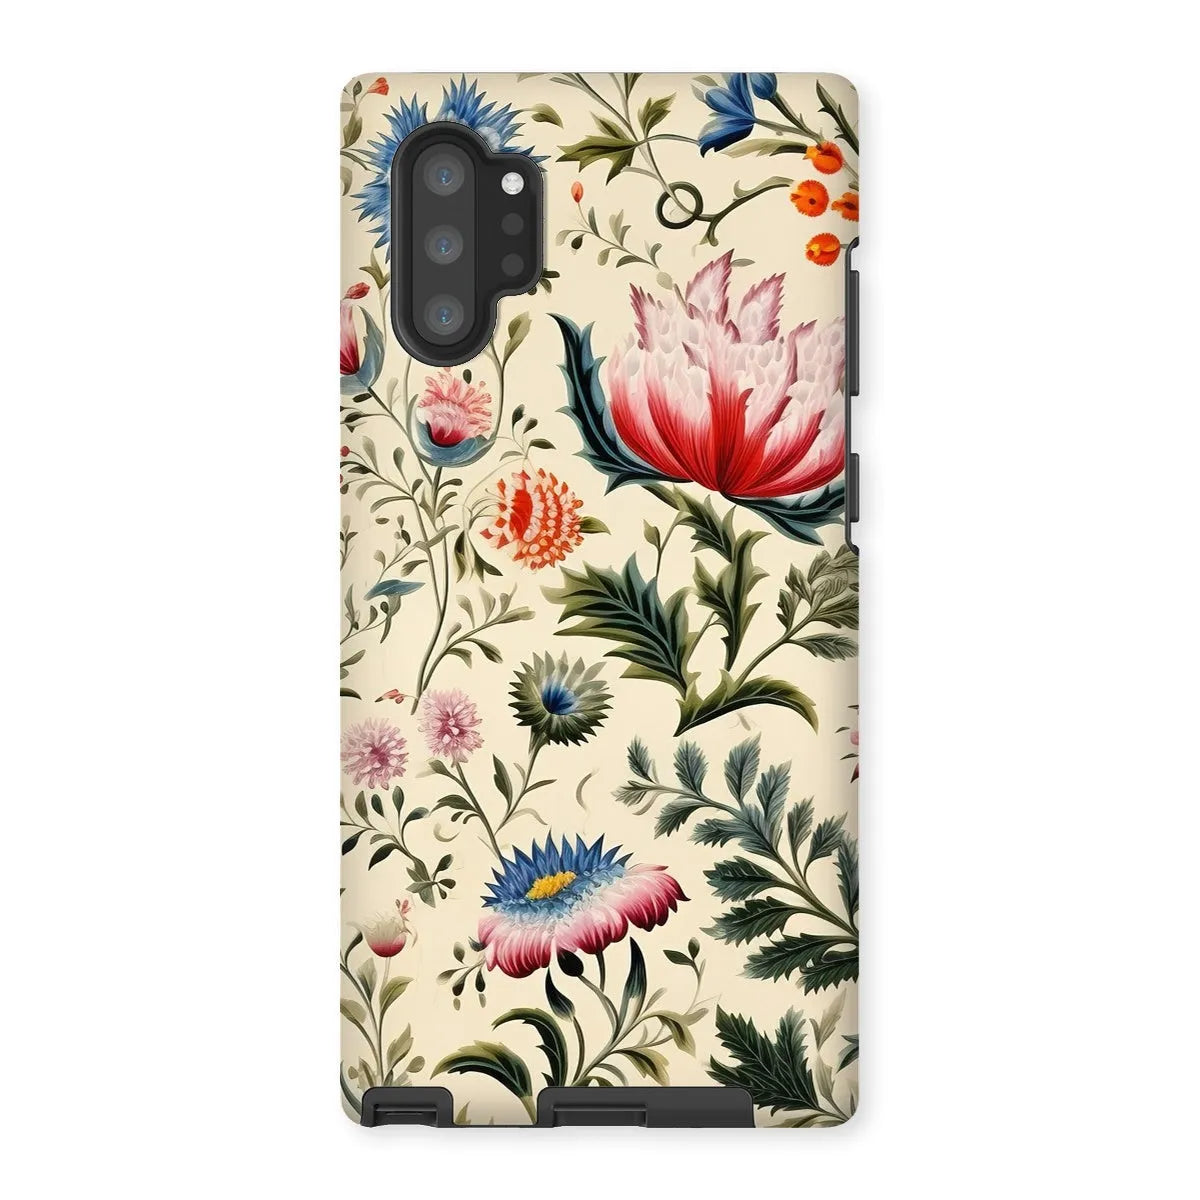 Wildflower Hoopla - Floral Garden Aesthetic Phone Case - Samsung Galaxy Note 10p / Matte - Mobile Phone Cases